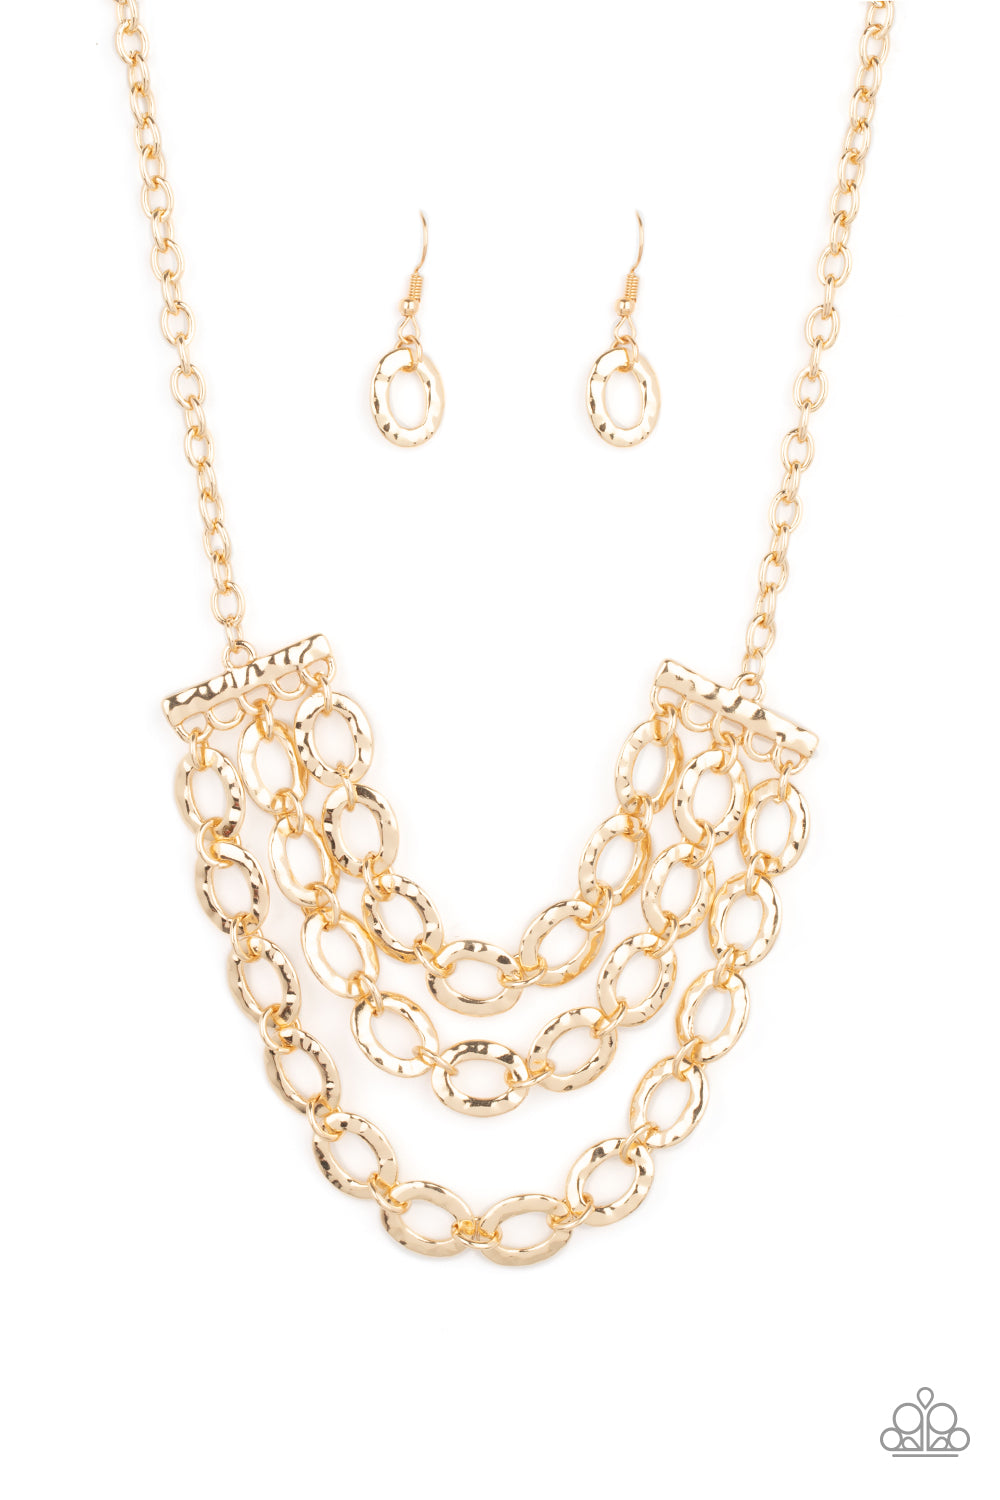 Repeat After Me - Gold - Paparazzi - Davetta Jewels